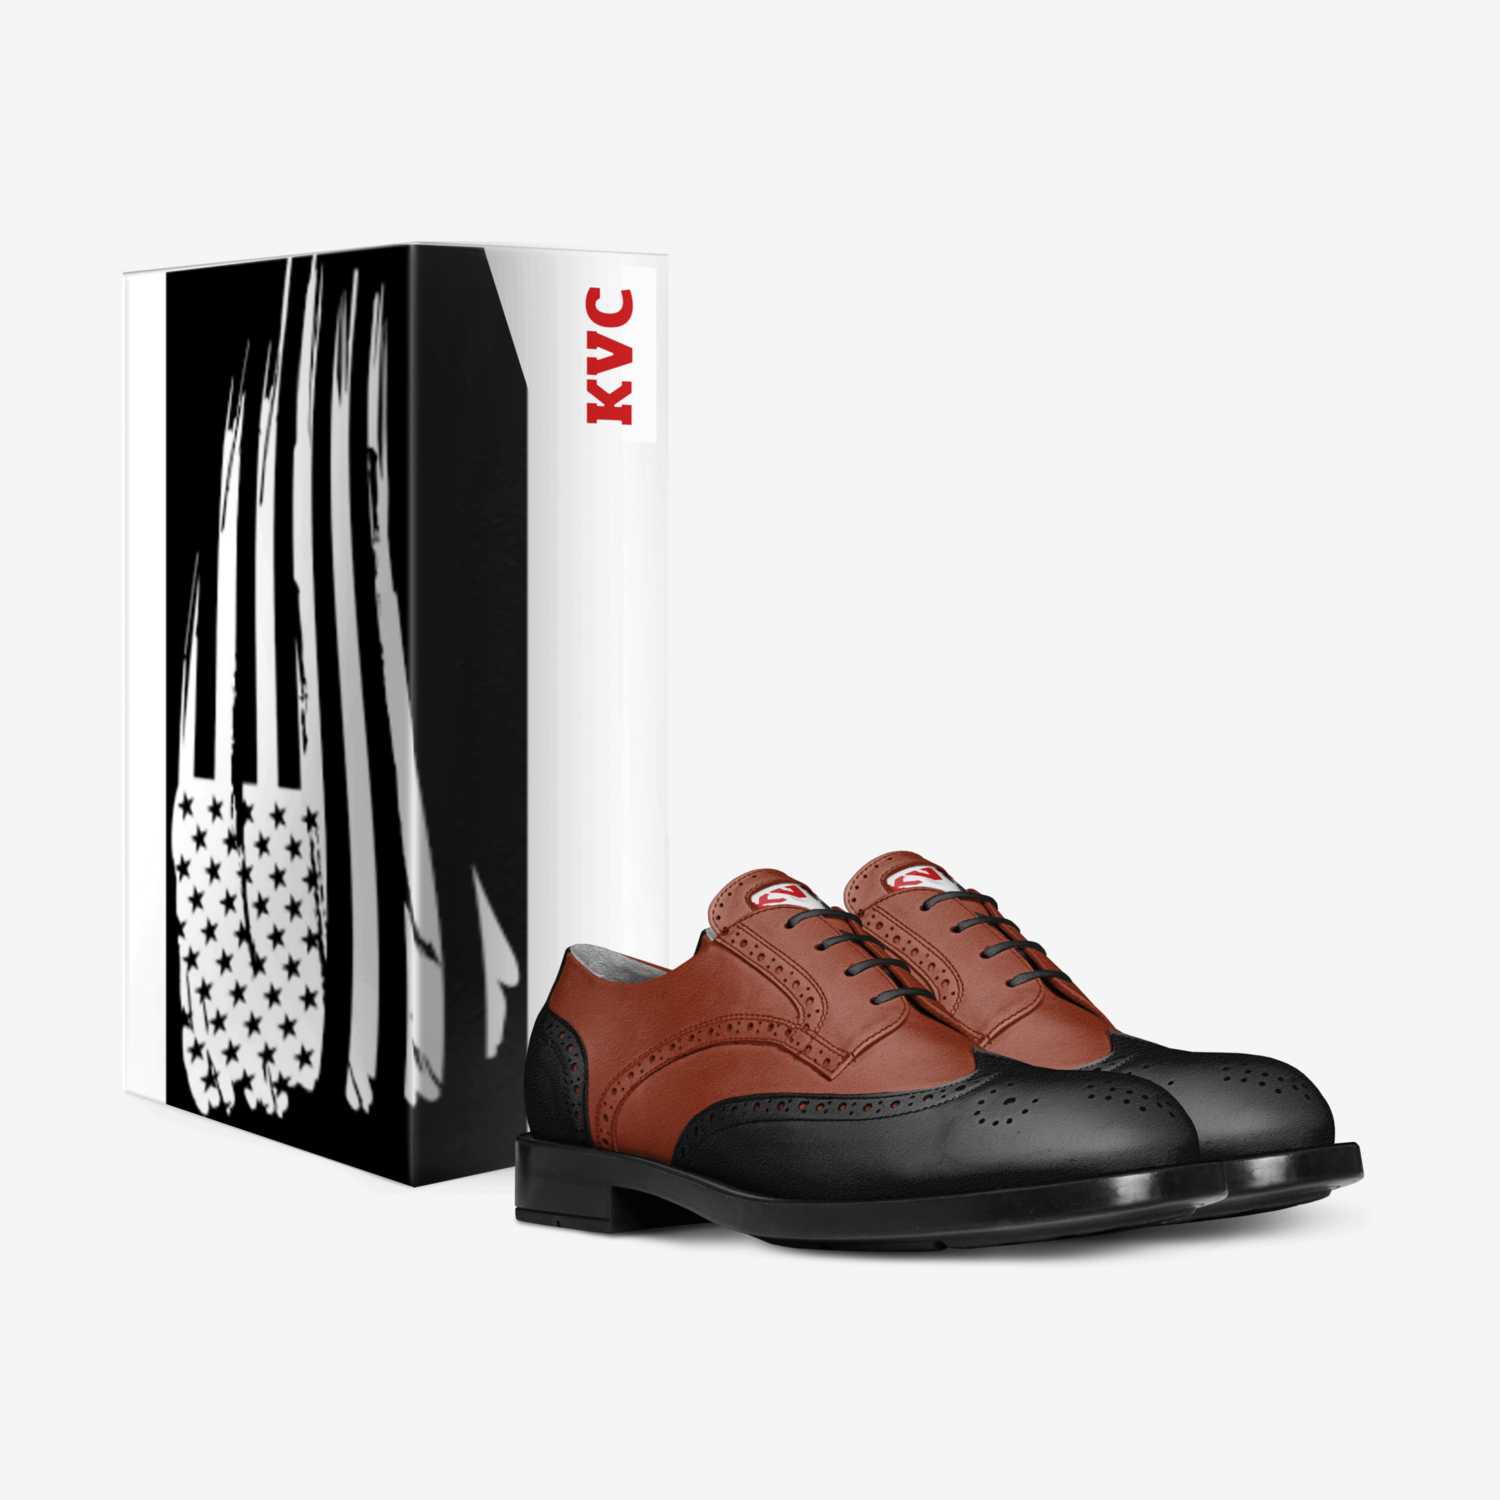 Stretch custom made in Italy shoes by Kolton van Chapman | Box view